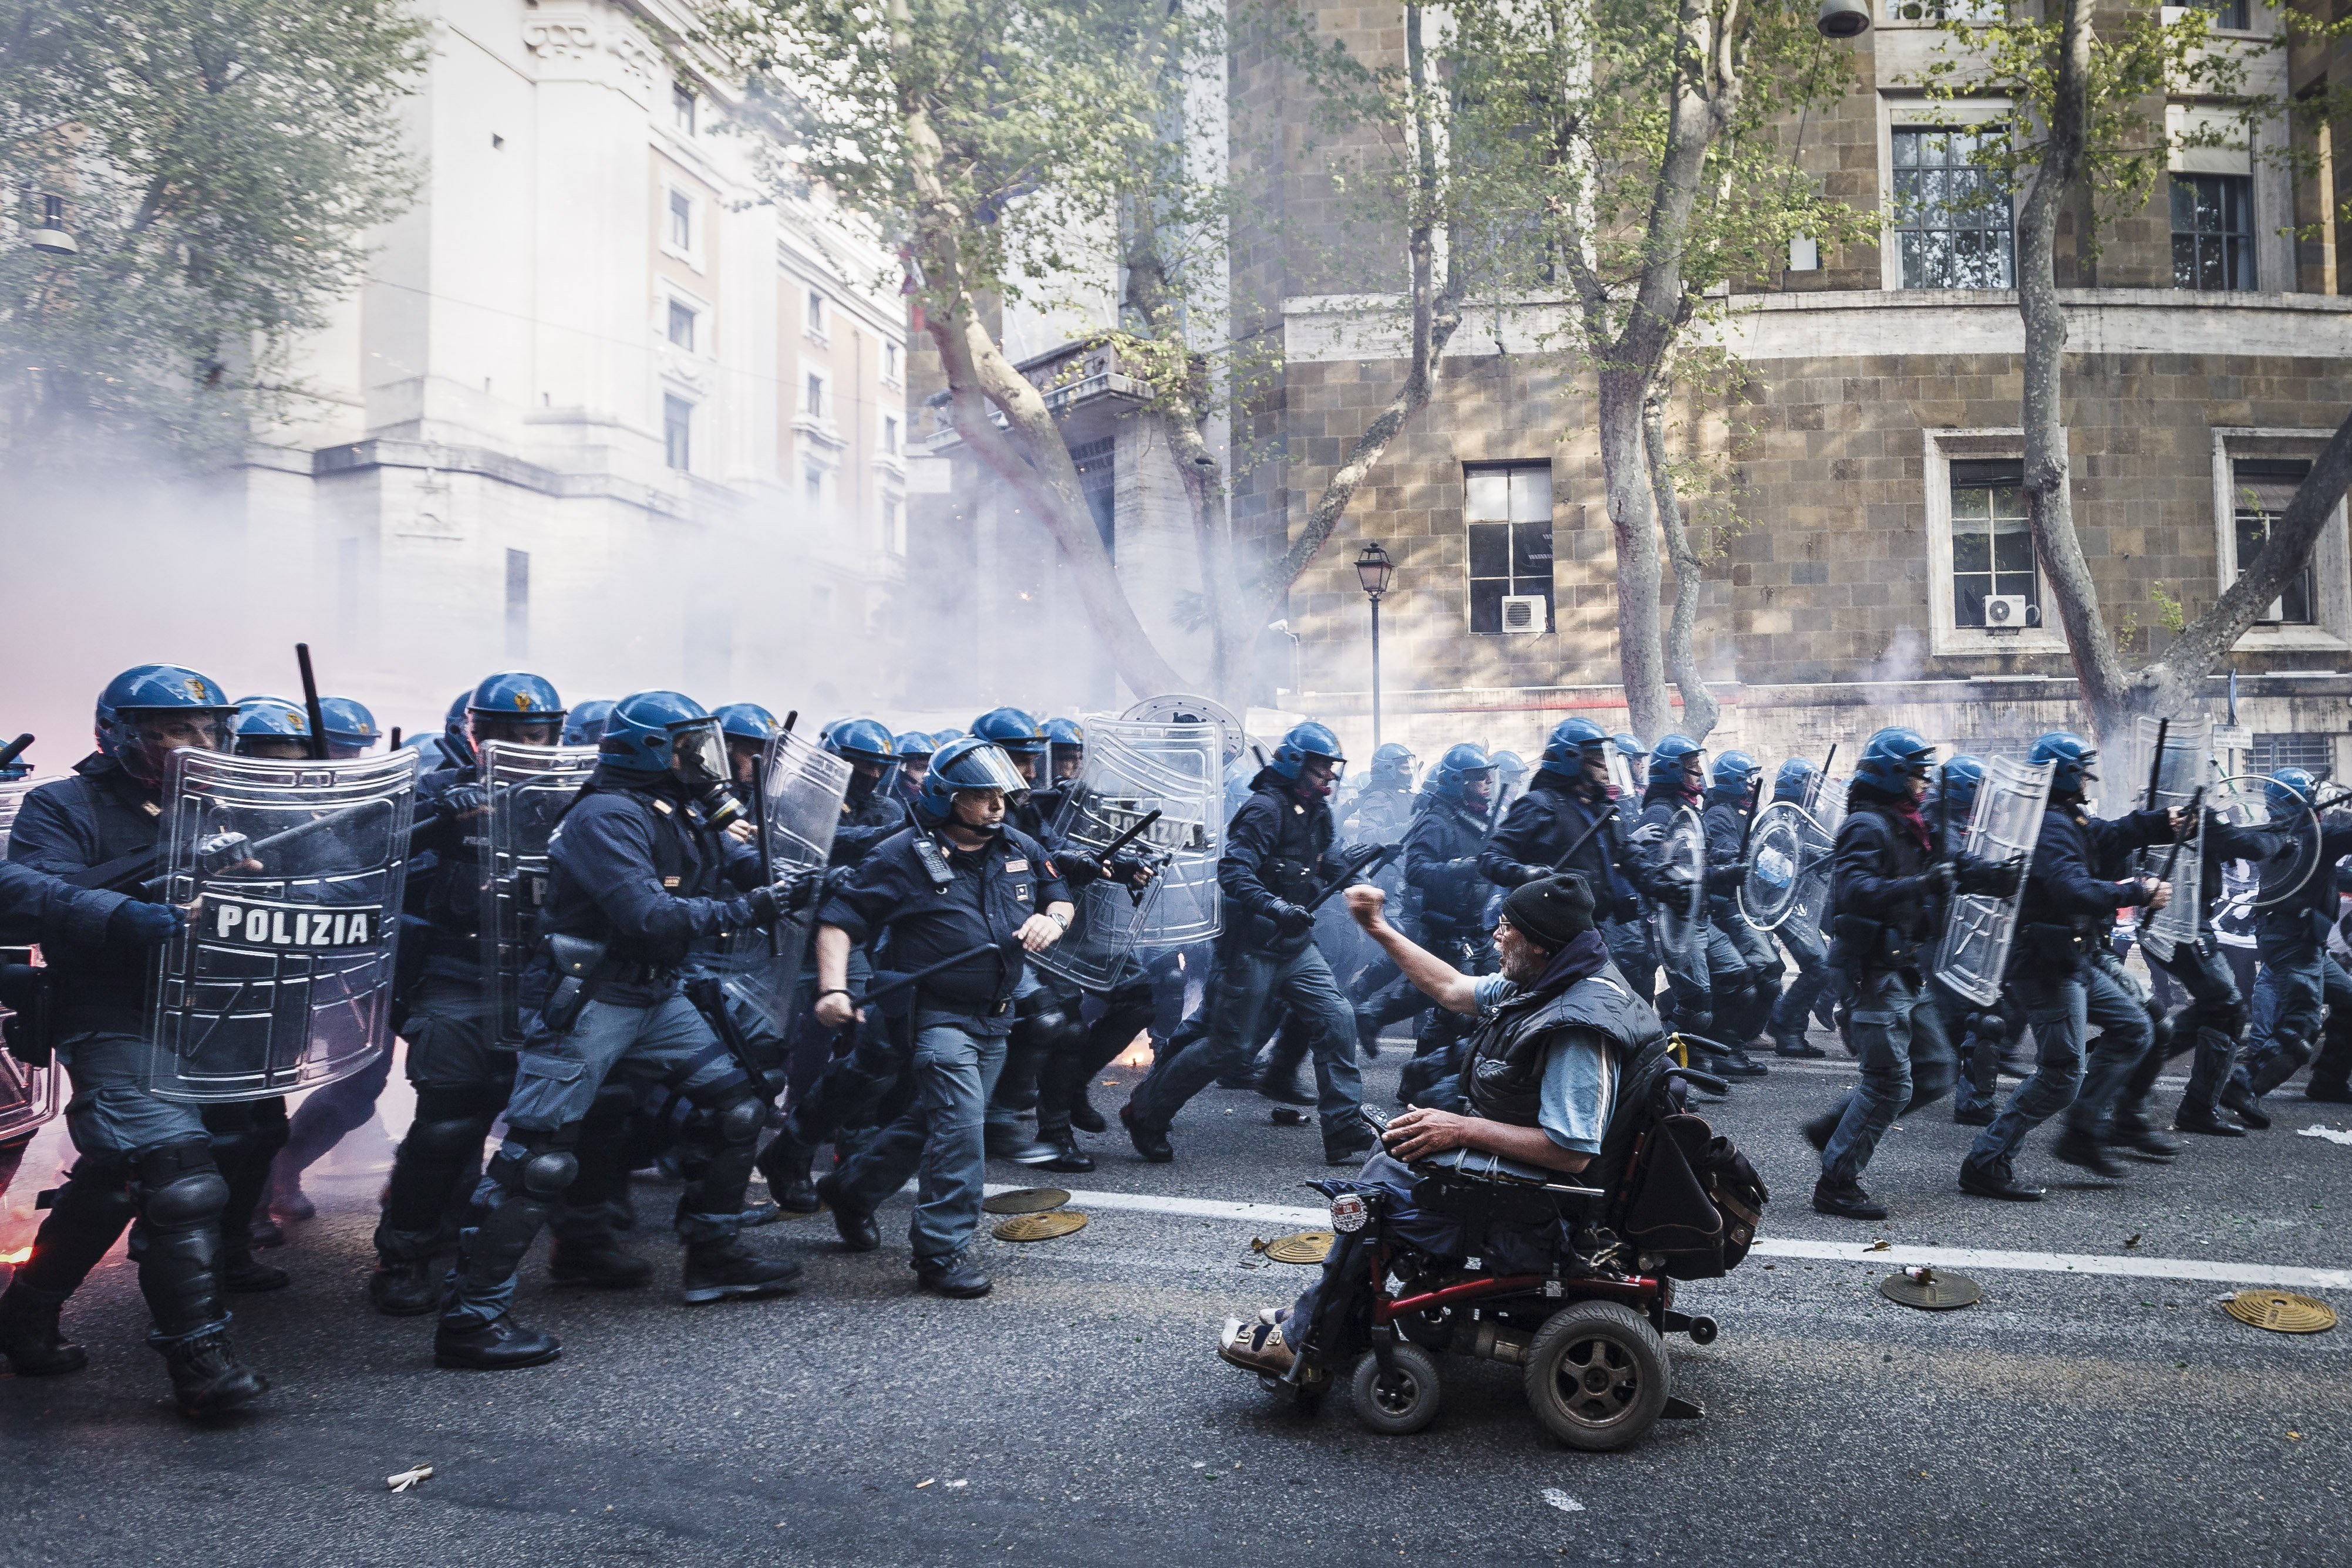 Apr. 12, 2014. Demonstrators clash with police during an anti-austerity demonstration in Rome. Thousands of protesters, from all over the country, marched against Troika austerity measures and to express their anger at governments plans to reform job market to deal with the economic crisis and its housing rights policies.